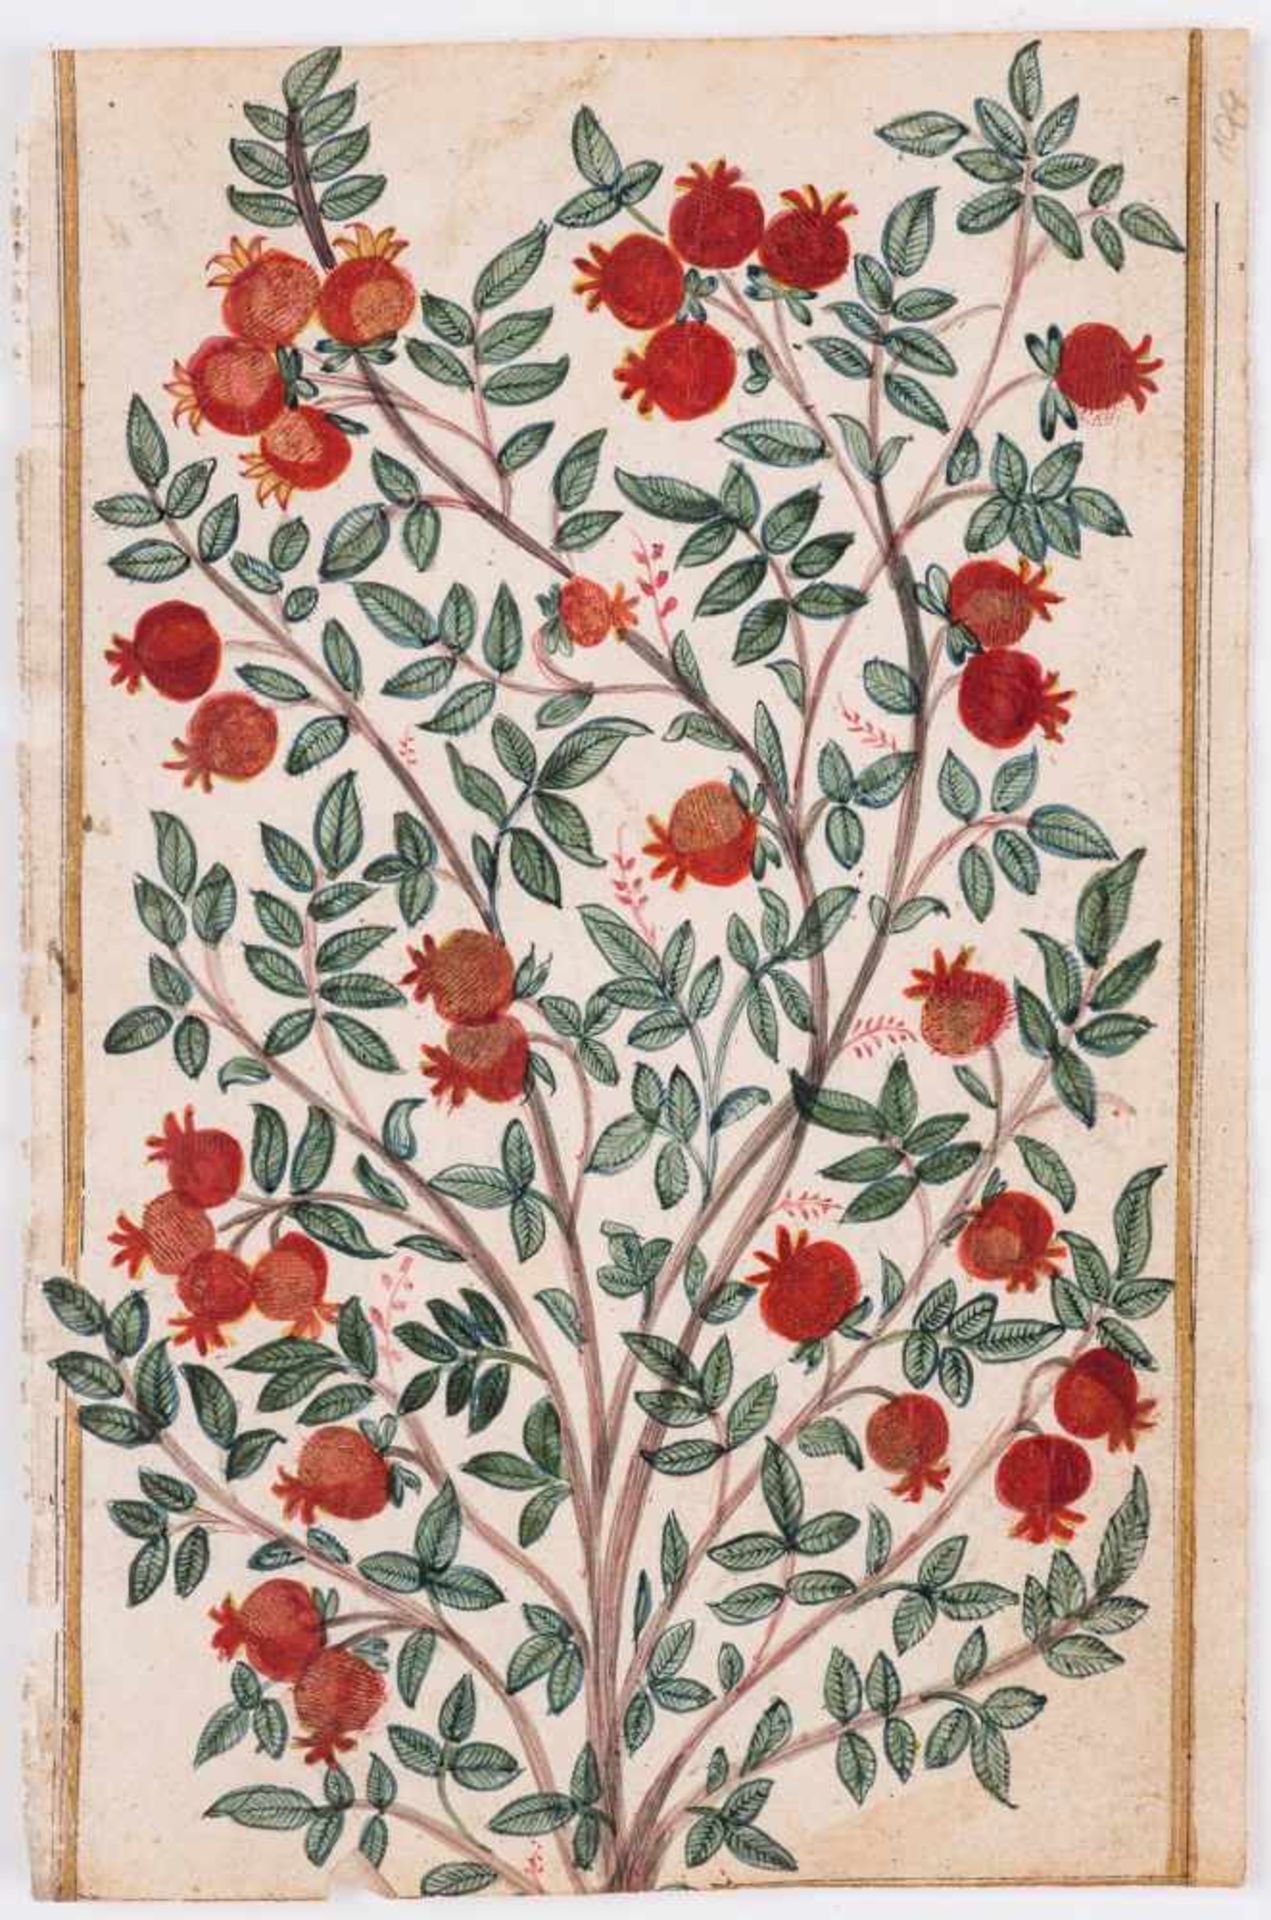 A GROUP OF ELEVEN FLOWER AND TREE MINIATURE PAINTINGS – INDIA 19th CENTURYWatercolors and gold paint - Image 6 of 12